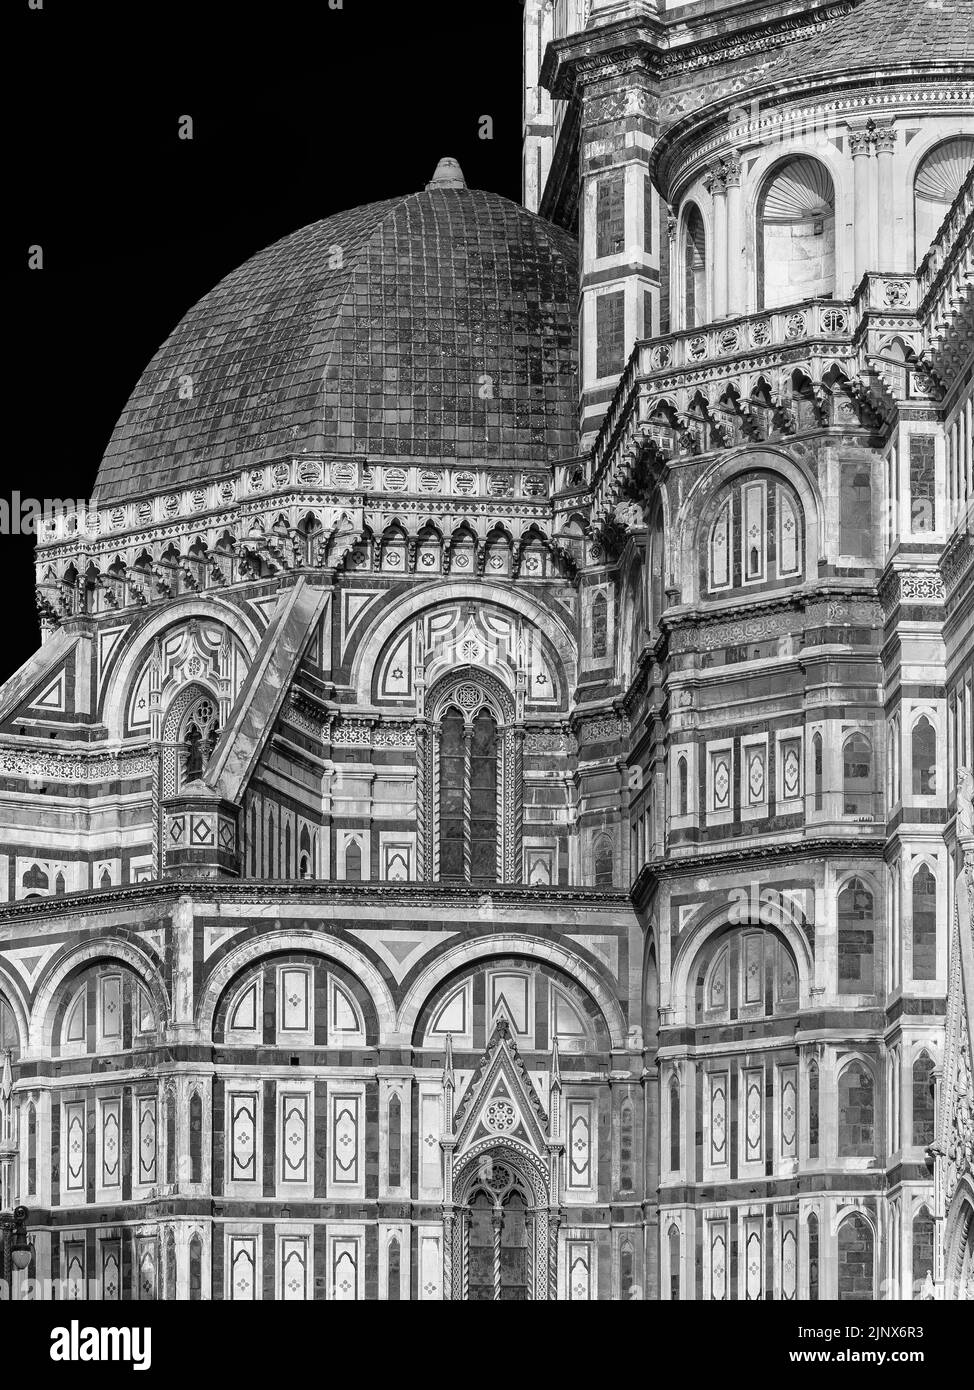 Gothic and Renaissance architecture in Florence. Partial view of Santa Maria del Fiore (St Mary of the Flower) 14-15th century dome anche chapel (Blac Stock Photo